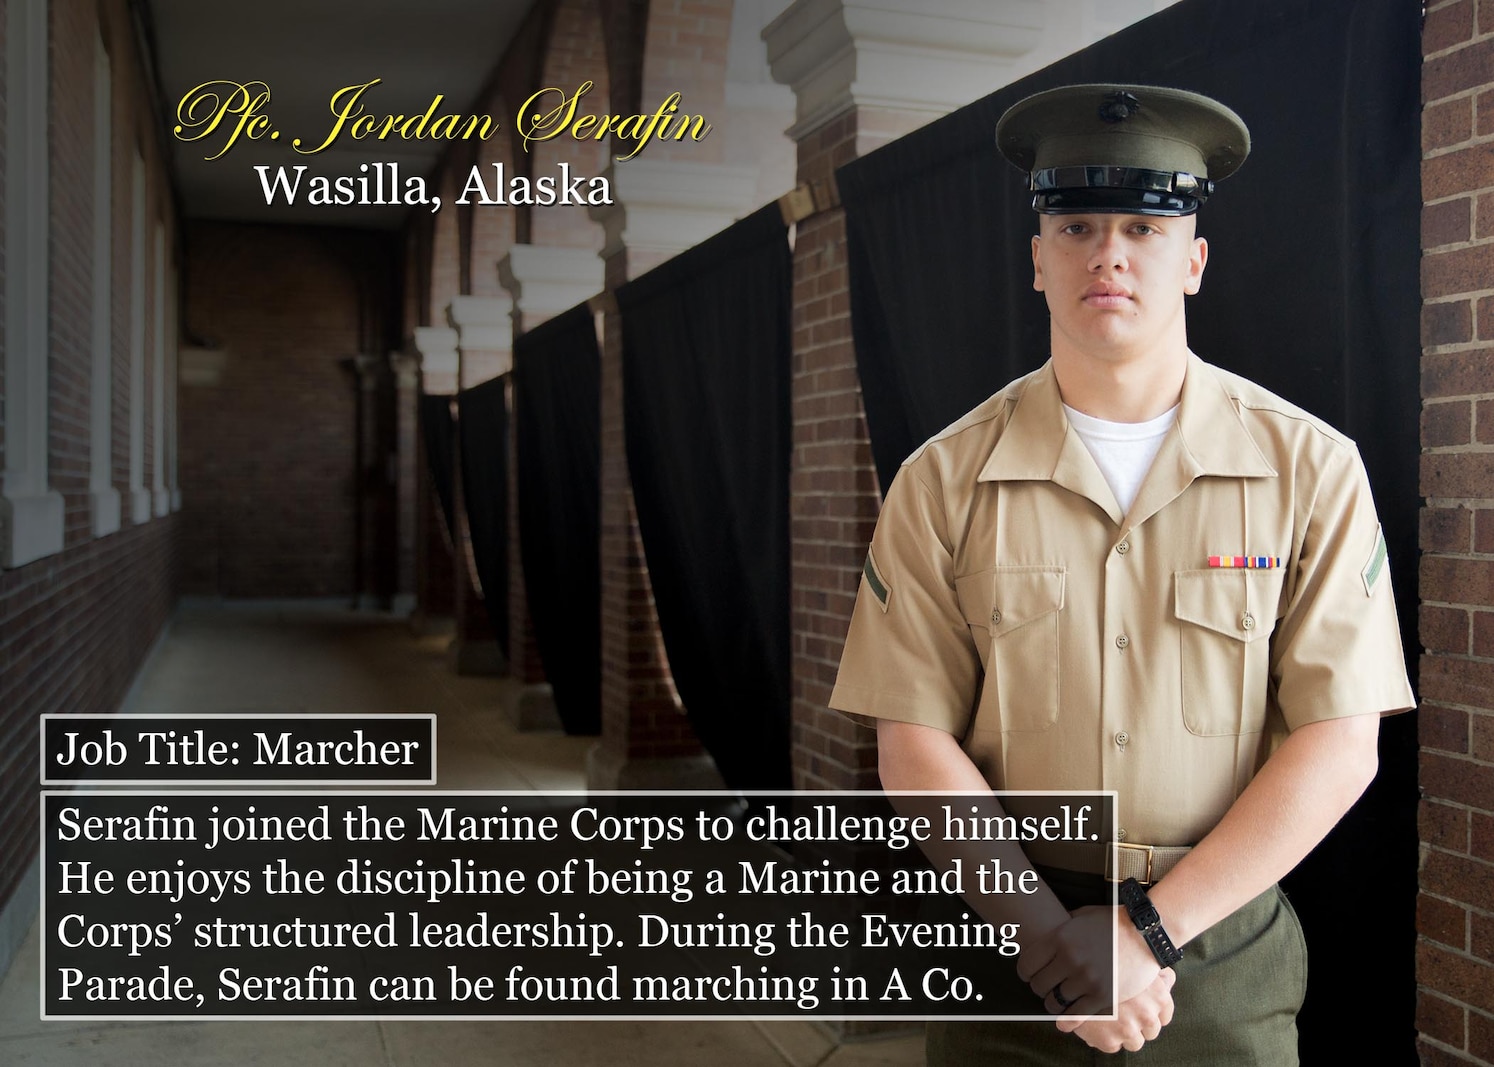 Pfc. Jordan Serafin
Wasilla, Alaska
Job Title: Marcher
Serafin joined the Marine Corps to challenge himself. He enjoys the discipline of being a Marine and the Corps’ structured leadership. During the Evening Parade, Serafin can be found marching in A Co.
(Official Marine Corps graphic by Cpl. Chi Nguyen/Released)